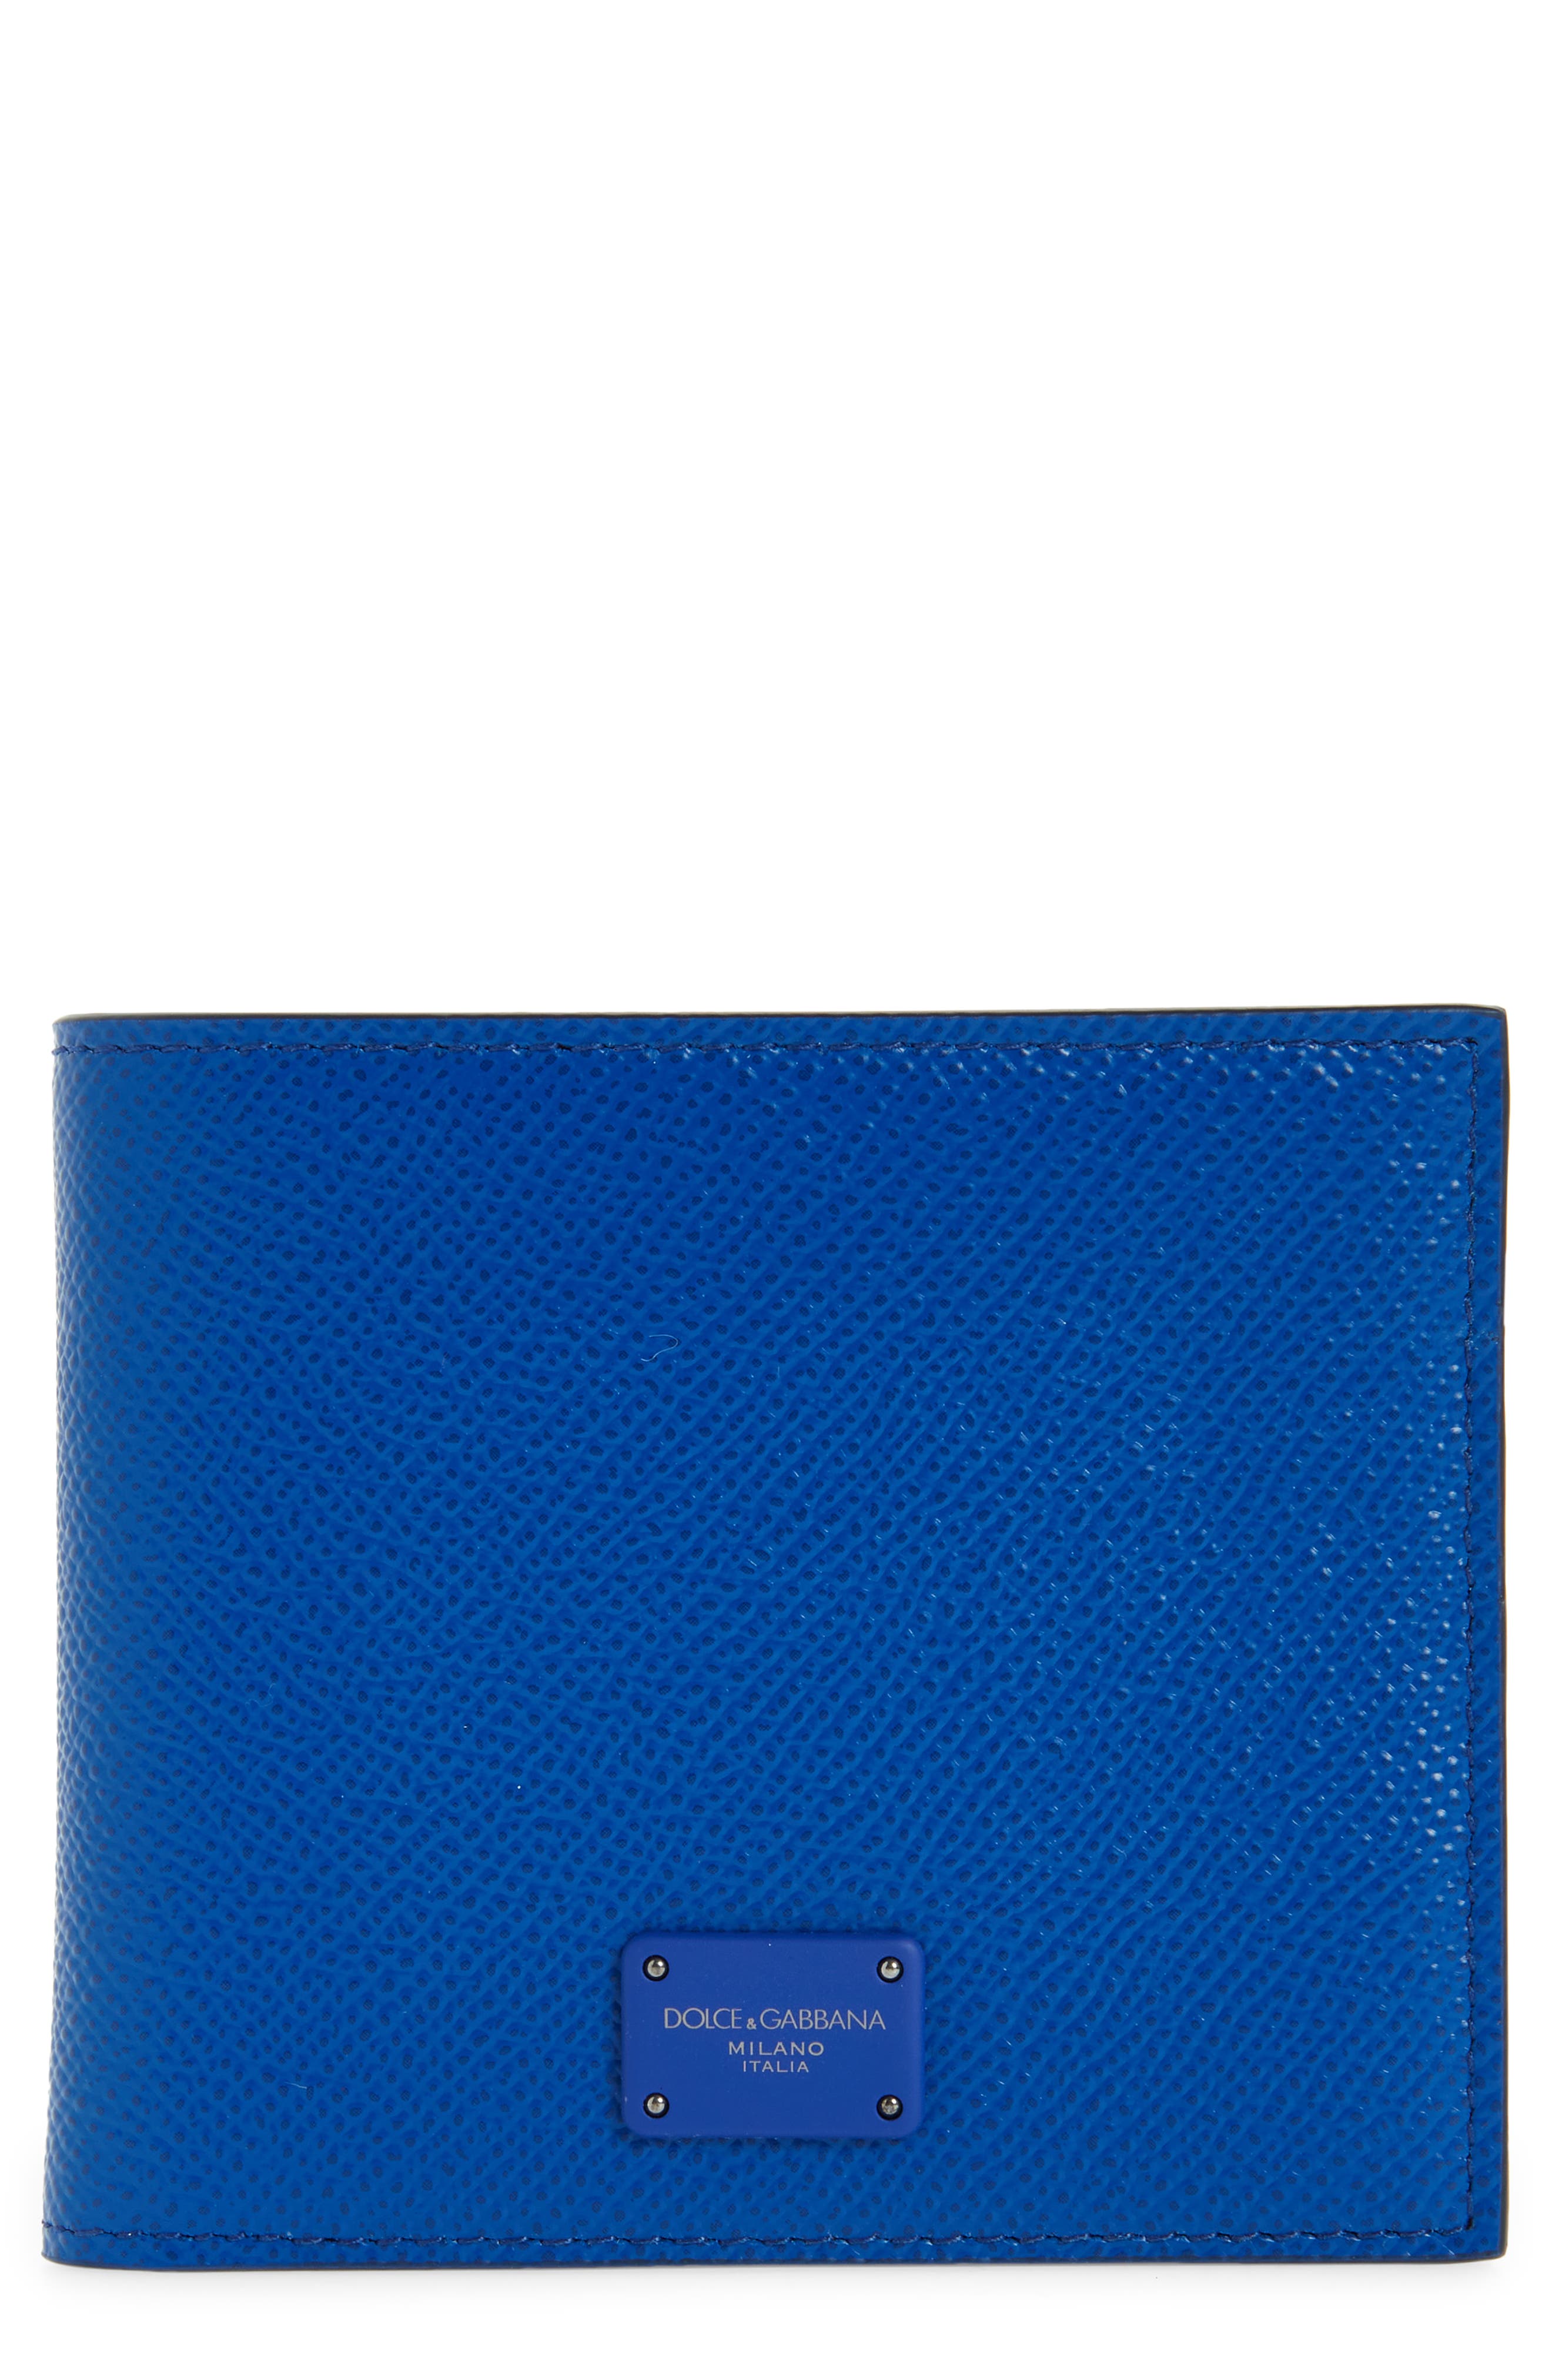 Dolce & Gabbana Dauphine Leather Bifold Wallet in Bluette Scuro at Nordstrom